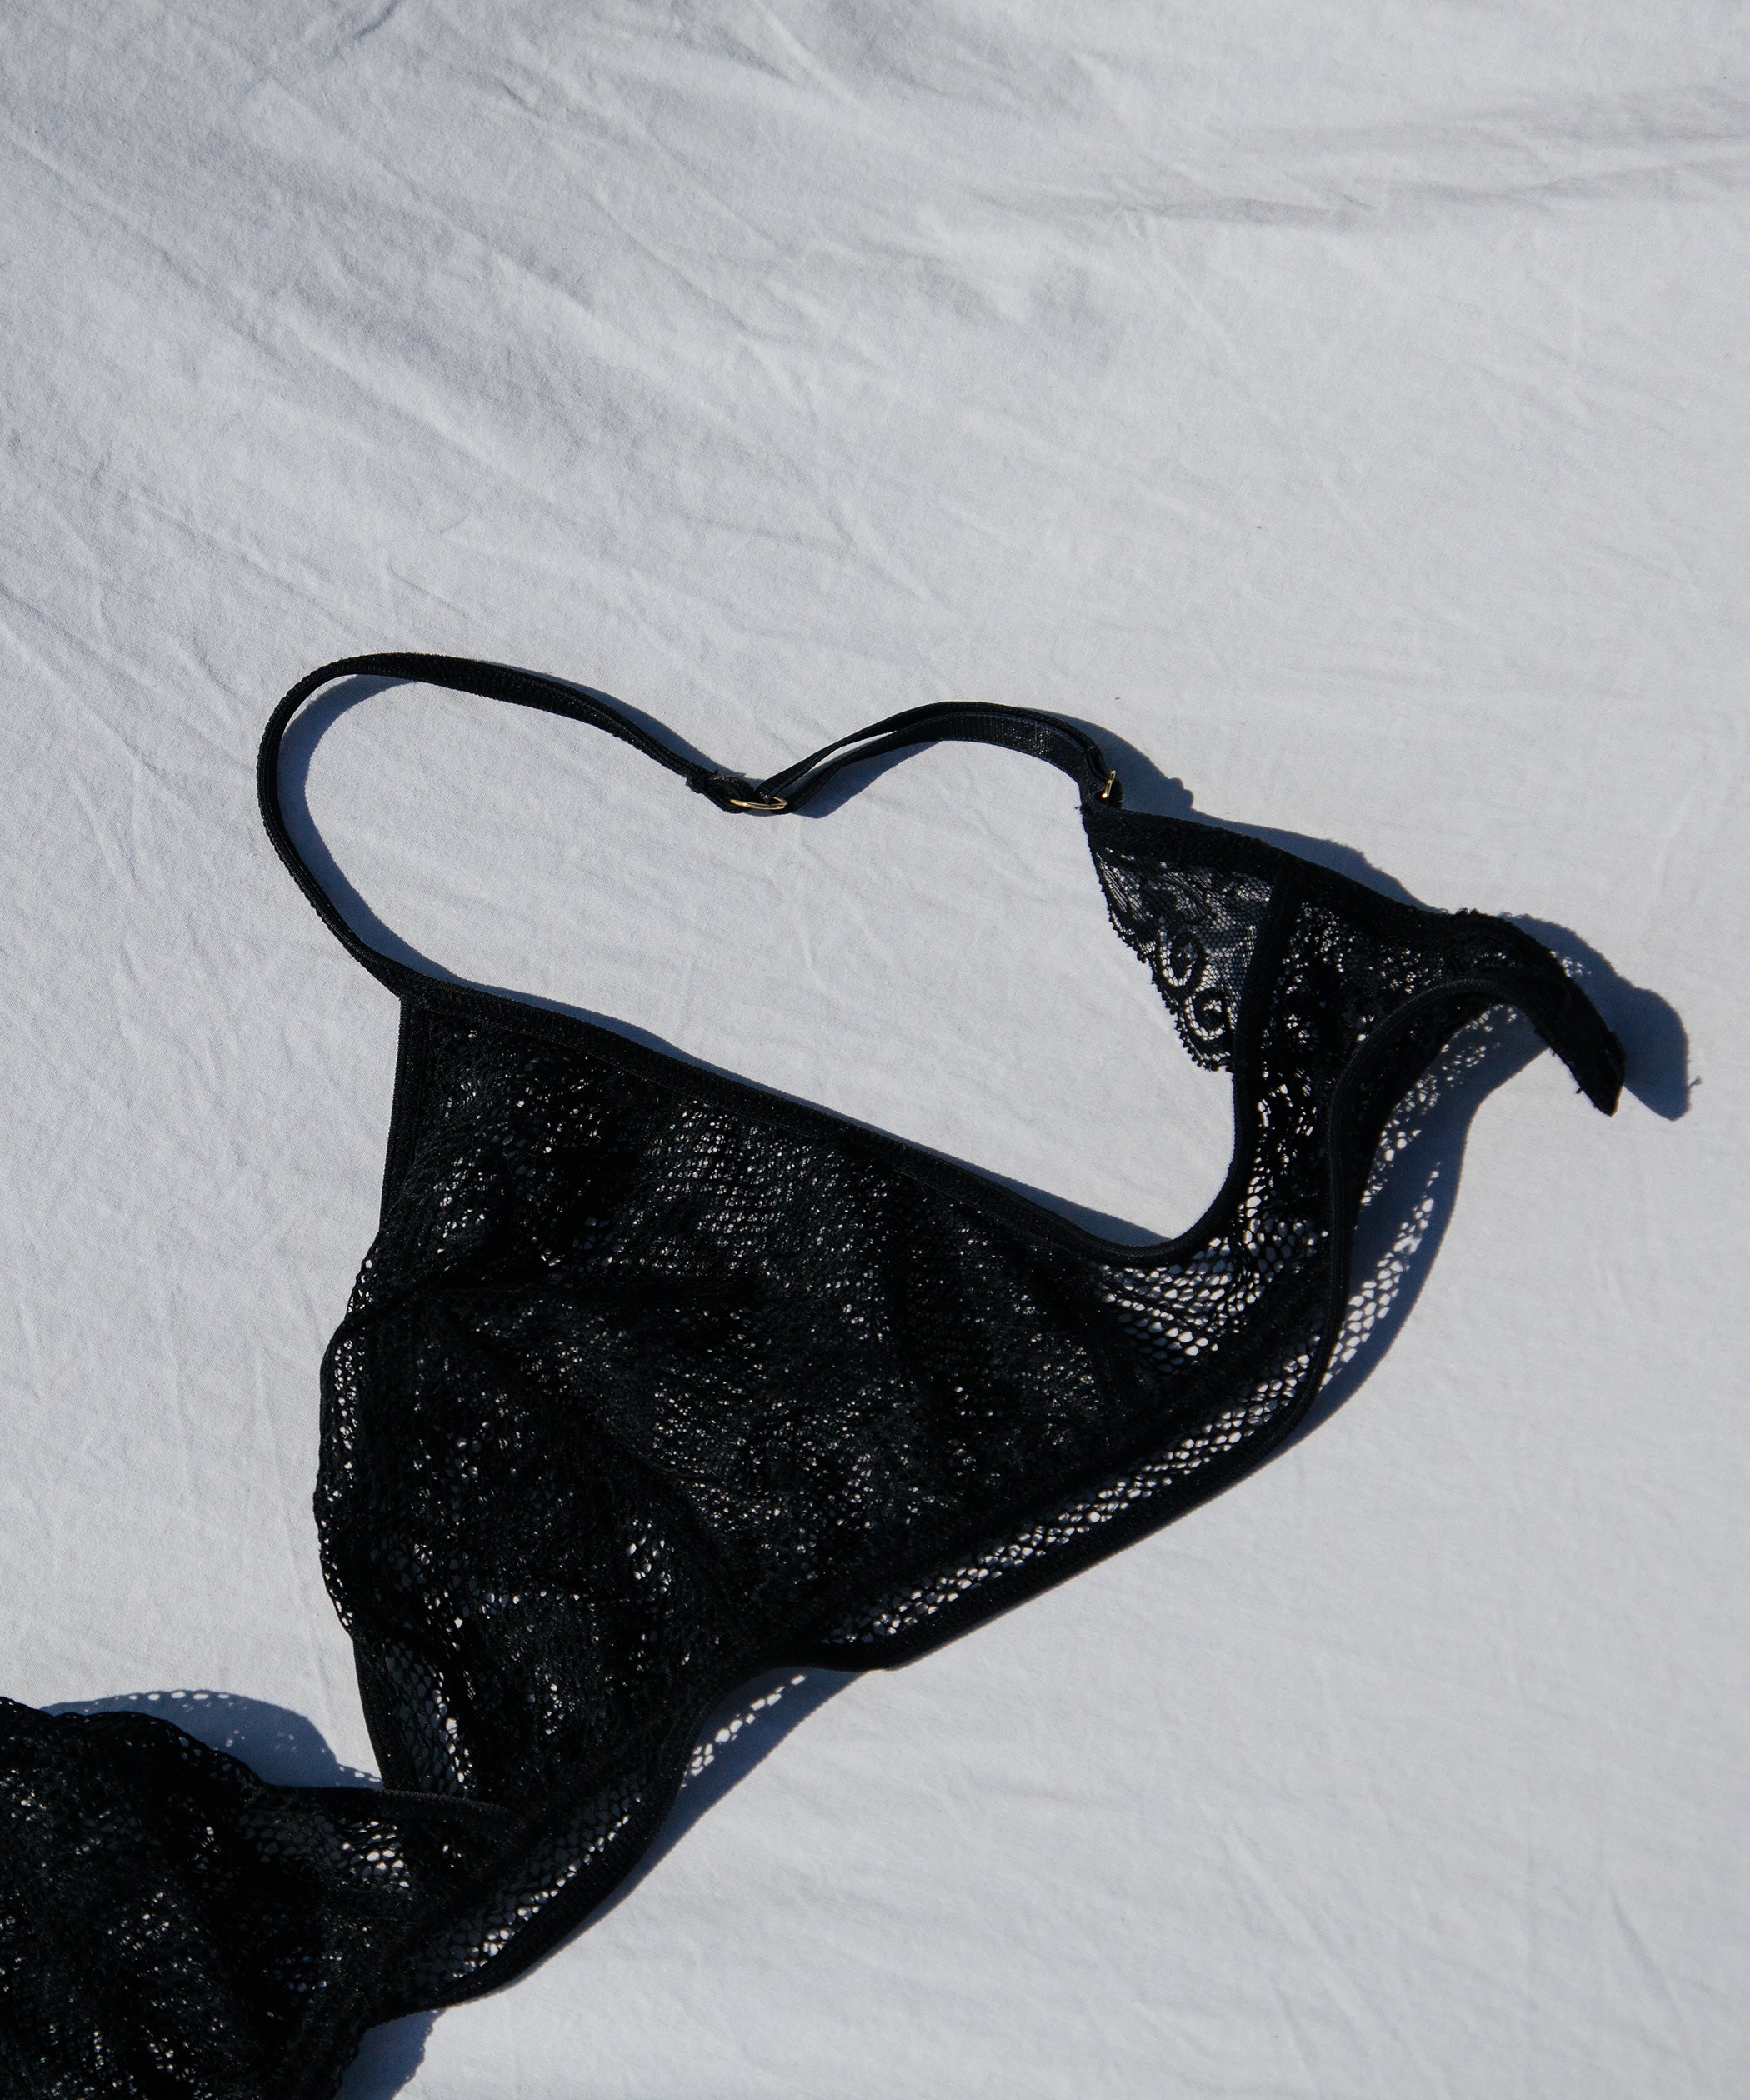 Buy Black Lace Tanga Panties Includes All These Naugh